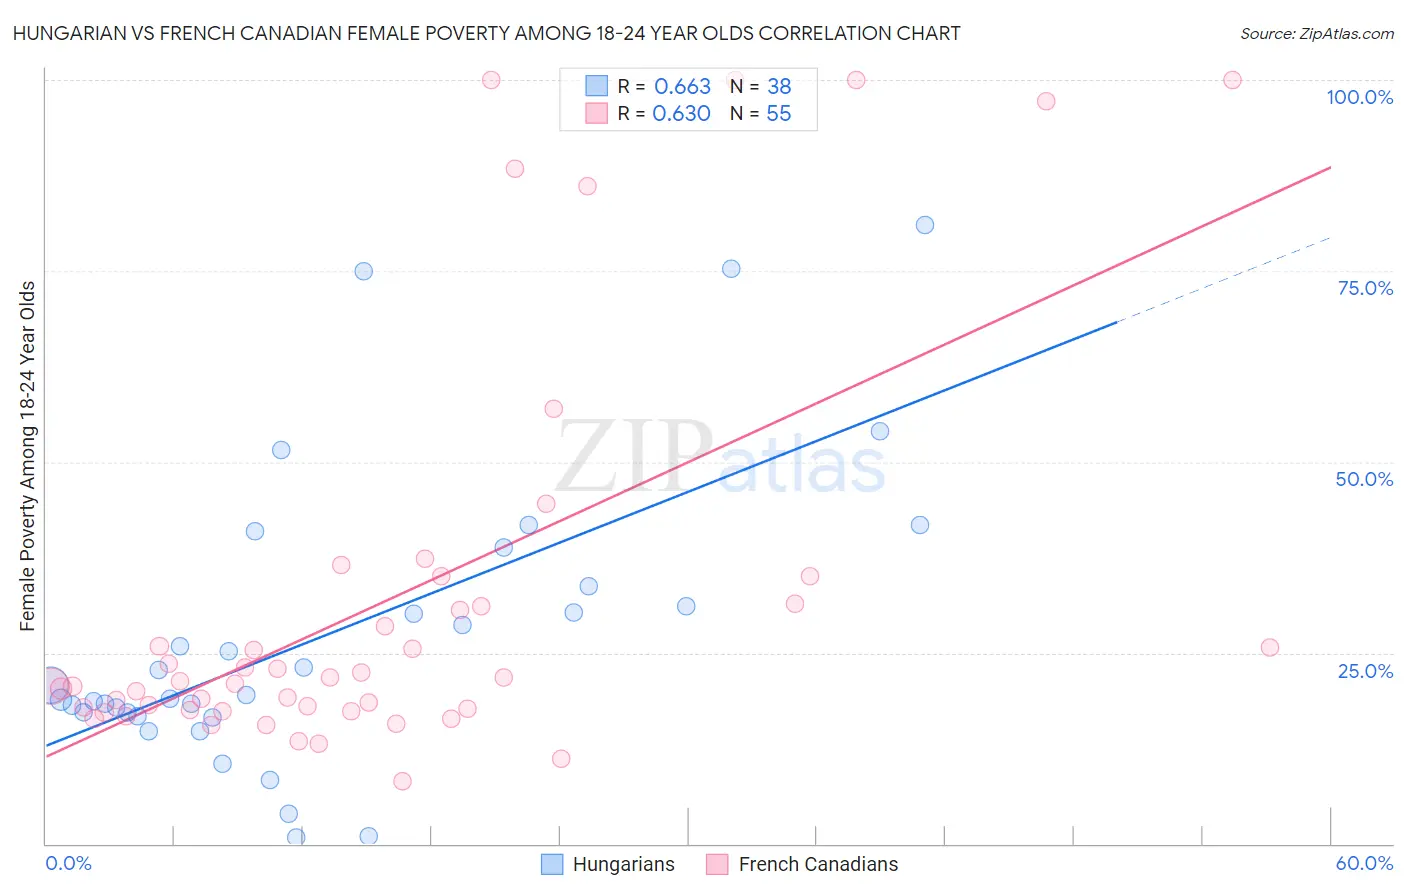 Hungarian vs French Canadian Female Poverty Among 18-24 Year Olds